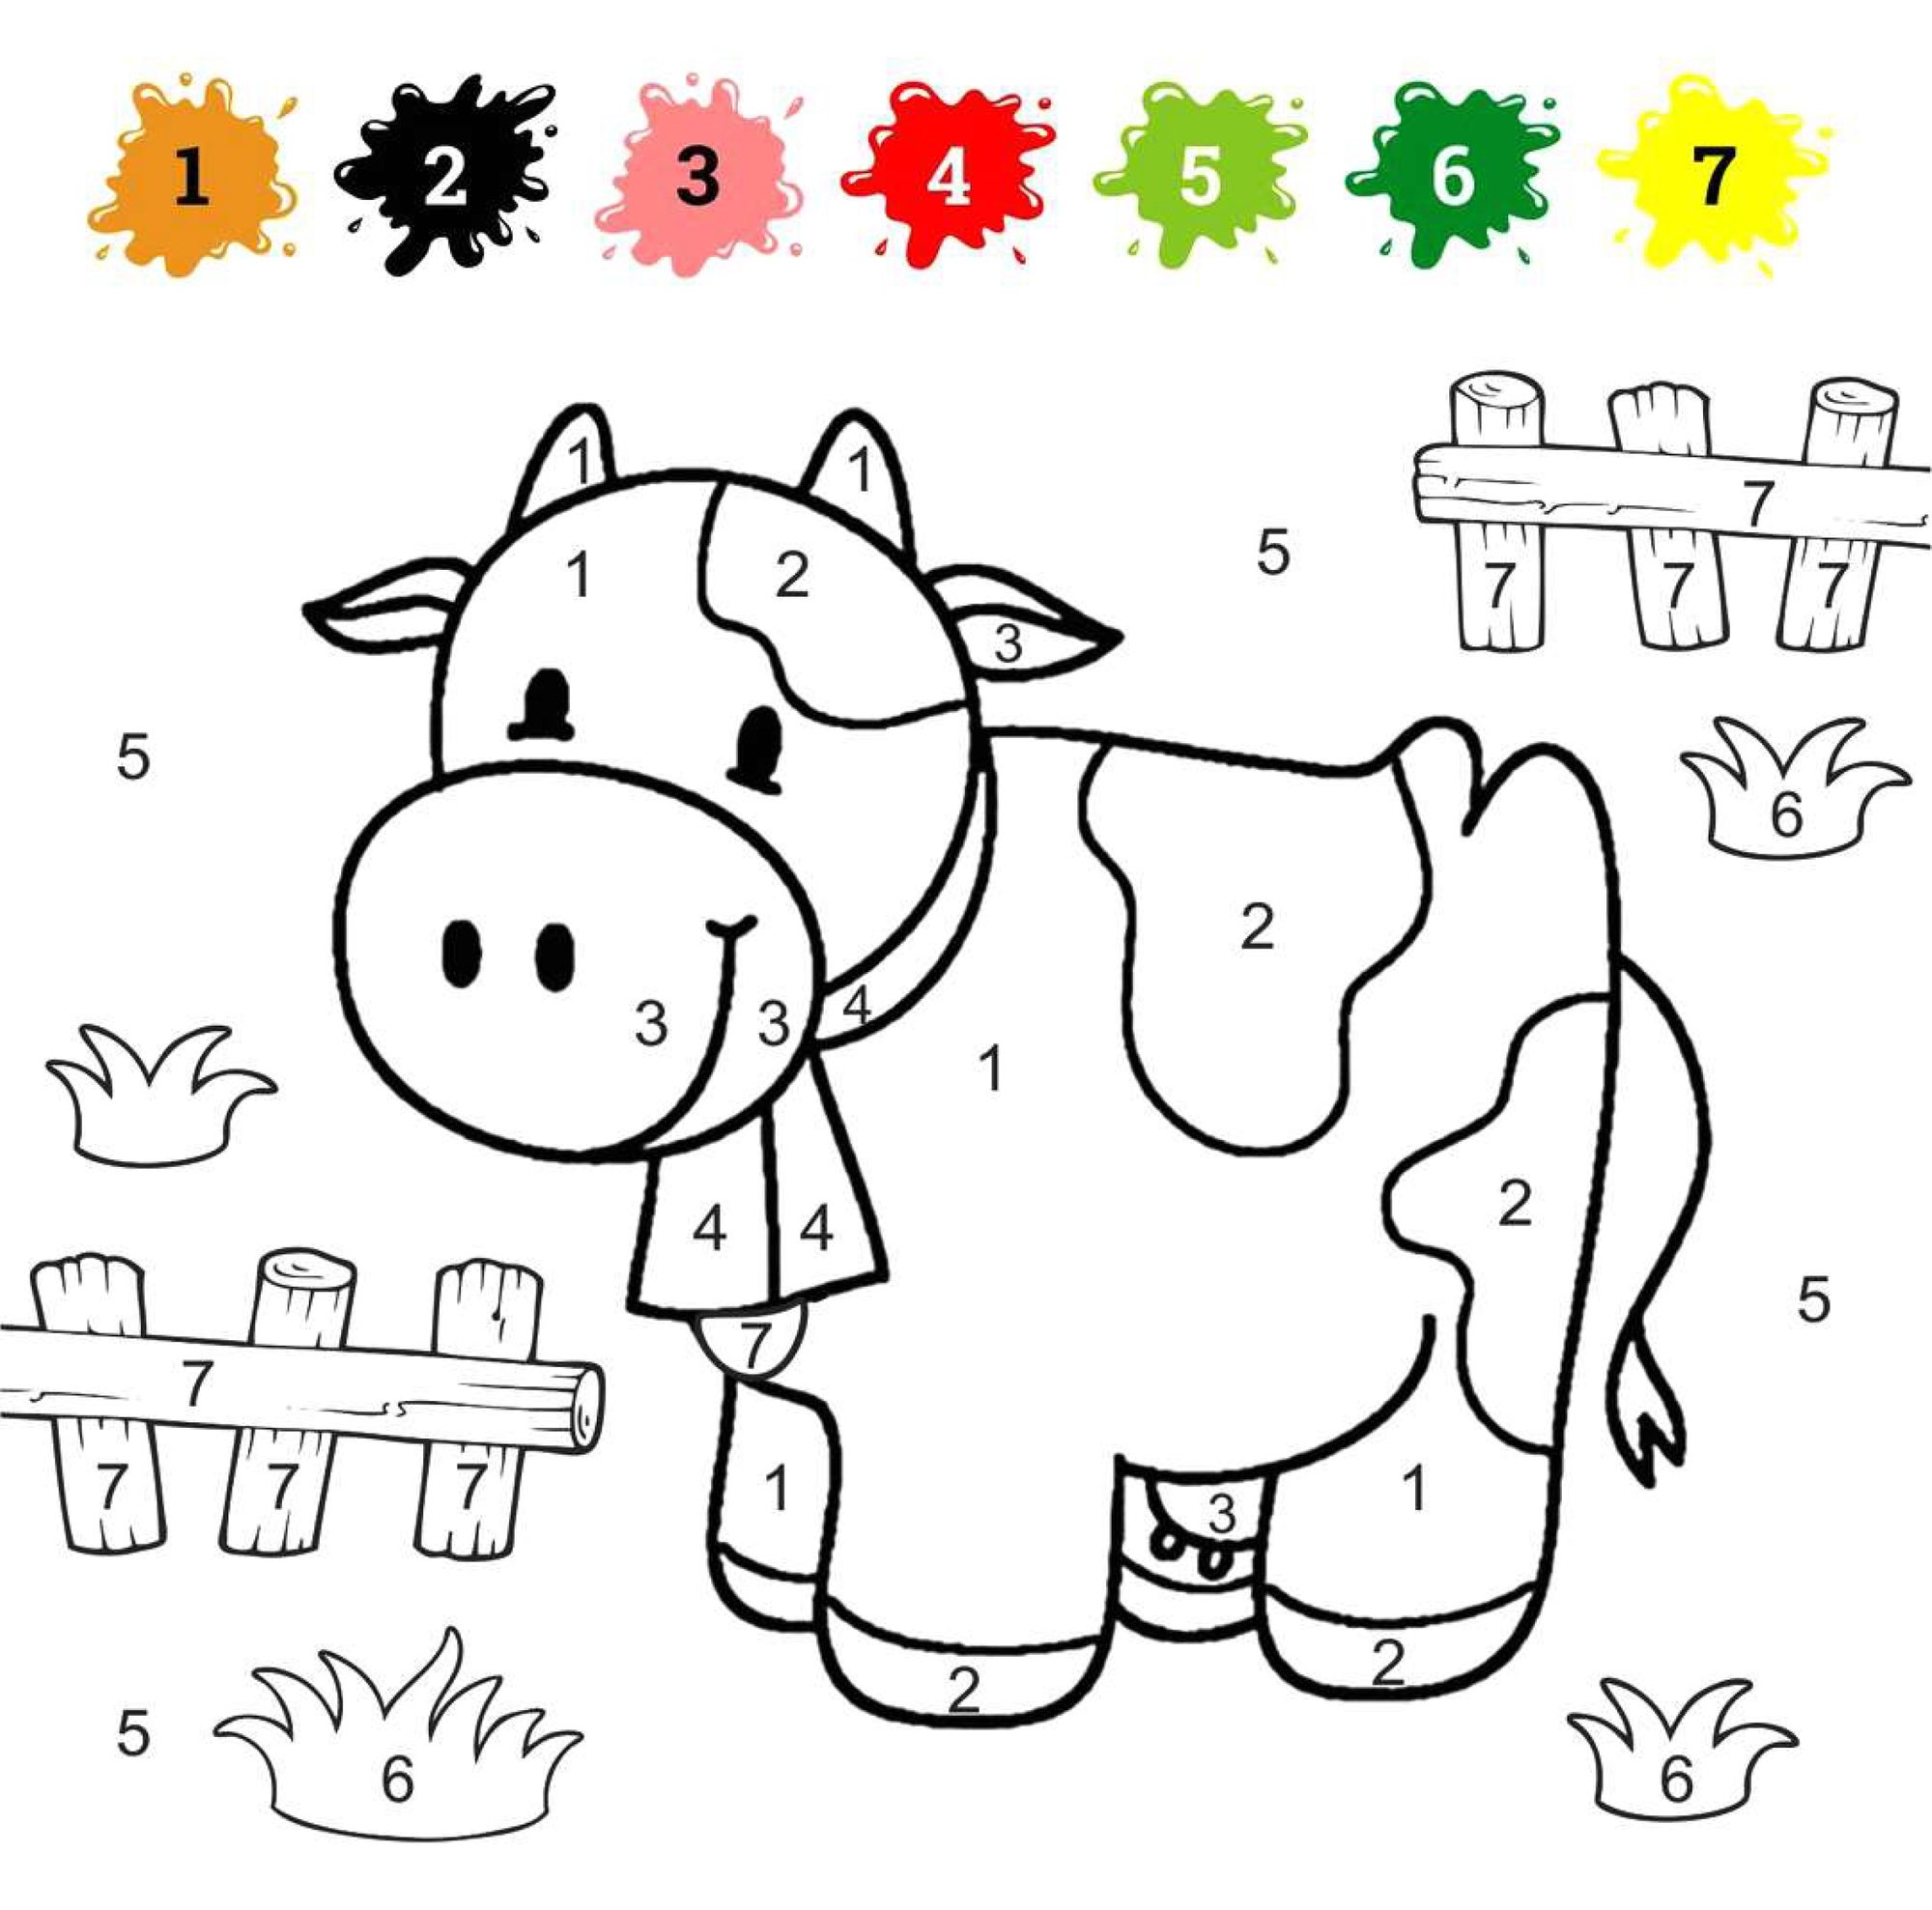 Free Printable Color By Number Coloring Pages Best Coloring Pages For 